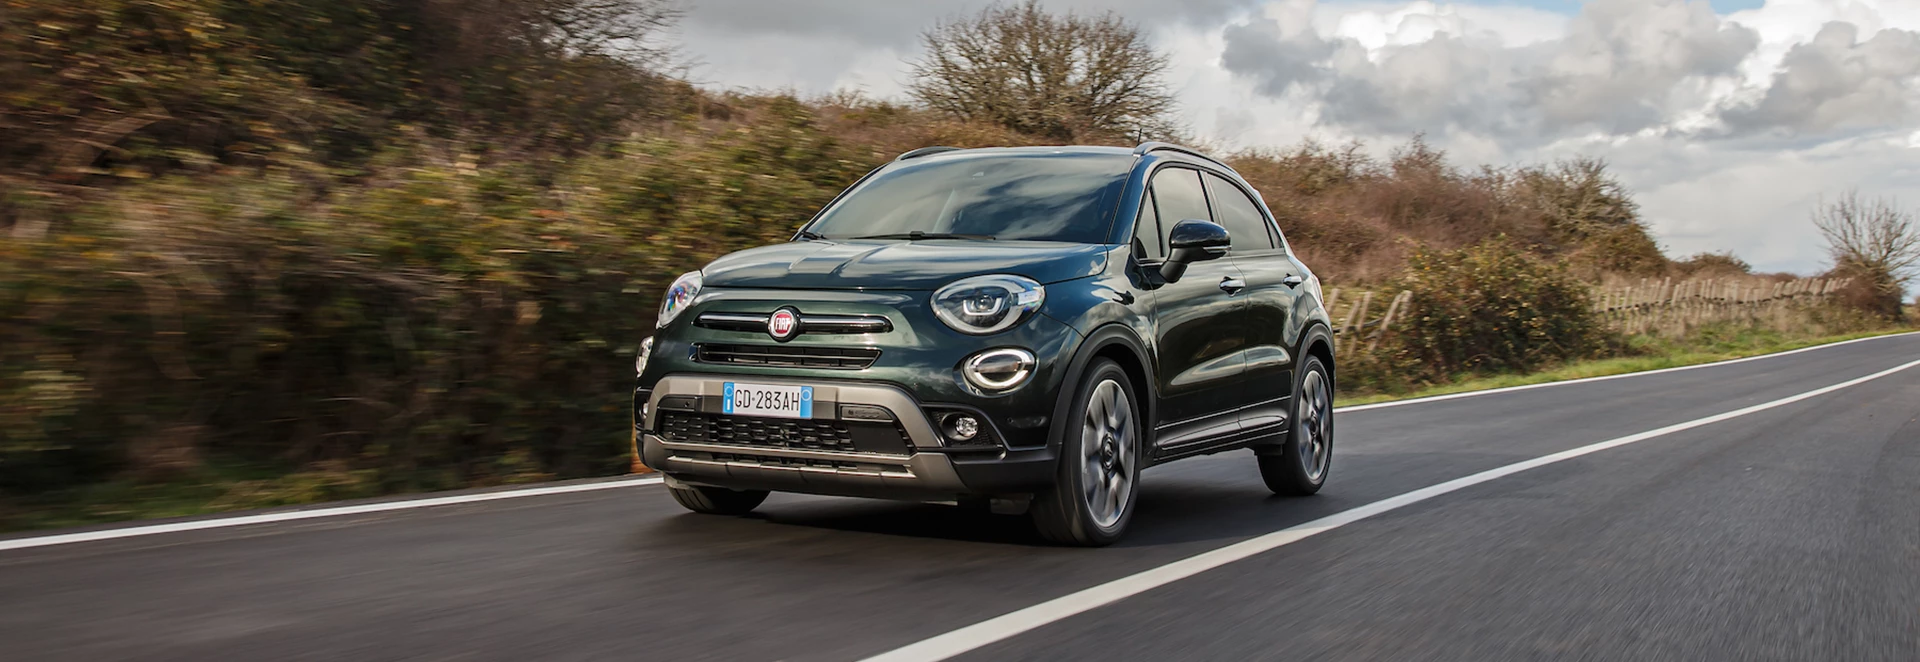 Buyer’s guide to the 2021 Fiat 500X 